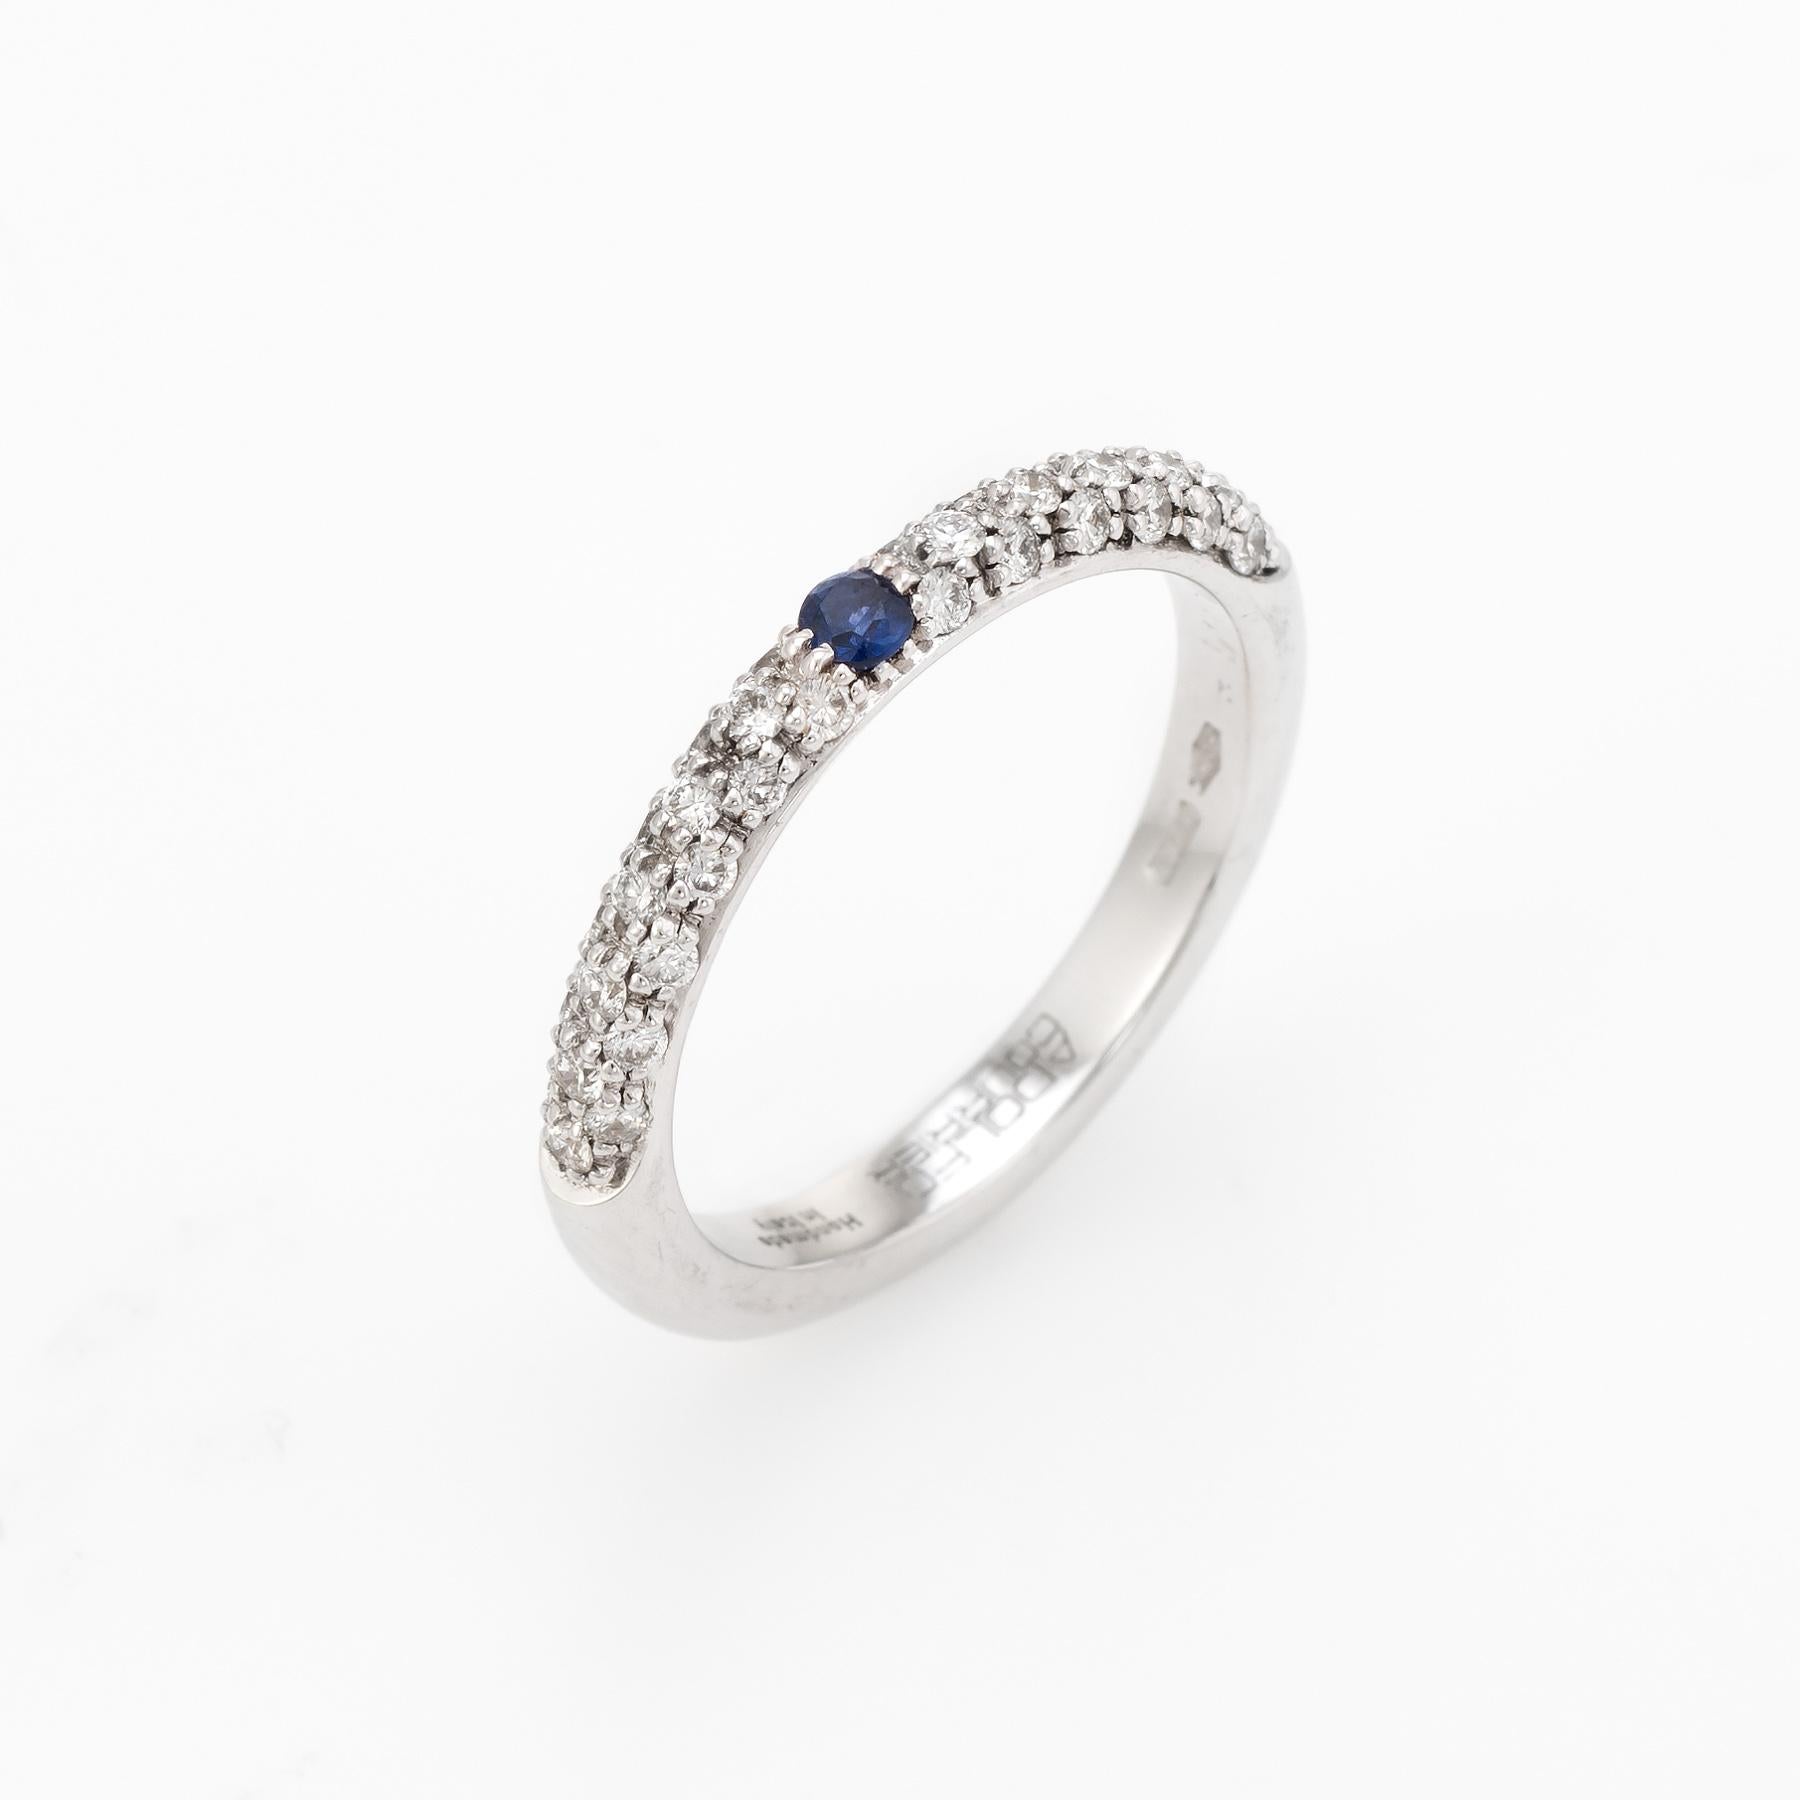 Elegant Adolfo Courrier stacking ring, crafted in 18 karat white gold. 

One estimated 0.05 carat sapphire, accented with 36 estimated 0.01 carat round brilliant cut diamonds totaling an estimated 0.36 carats (estimated at G-H color and VS2